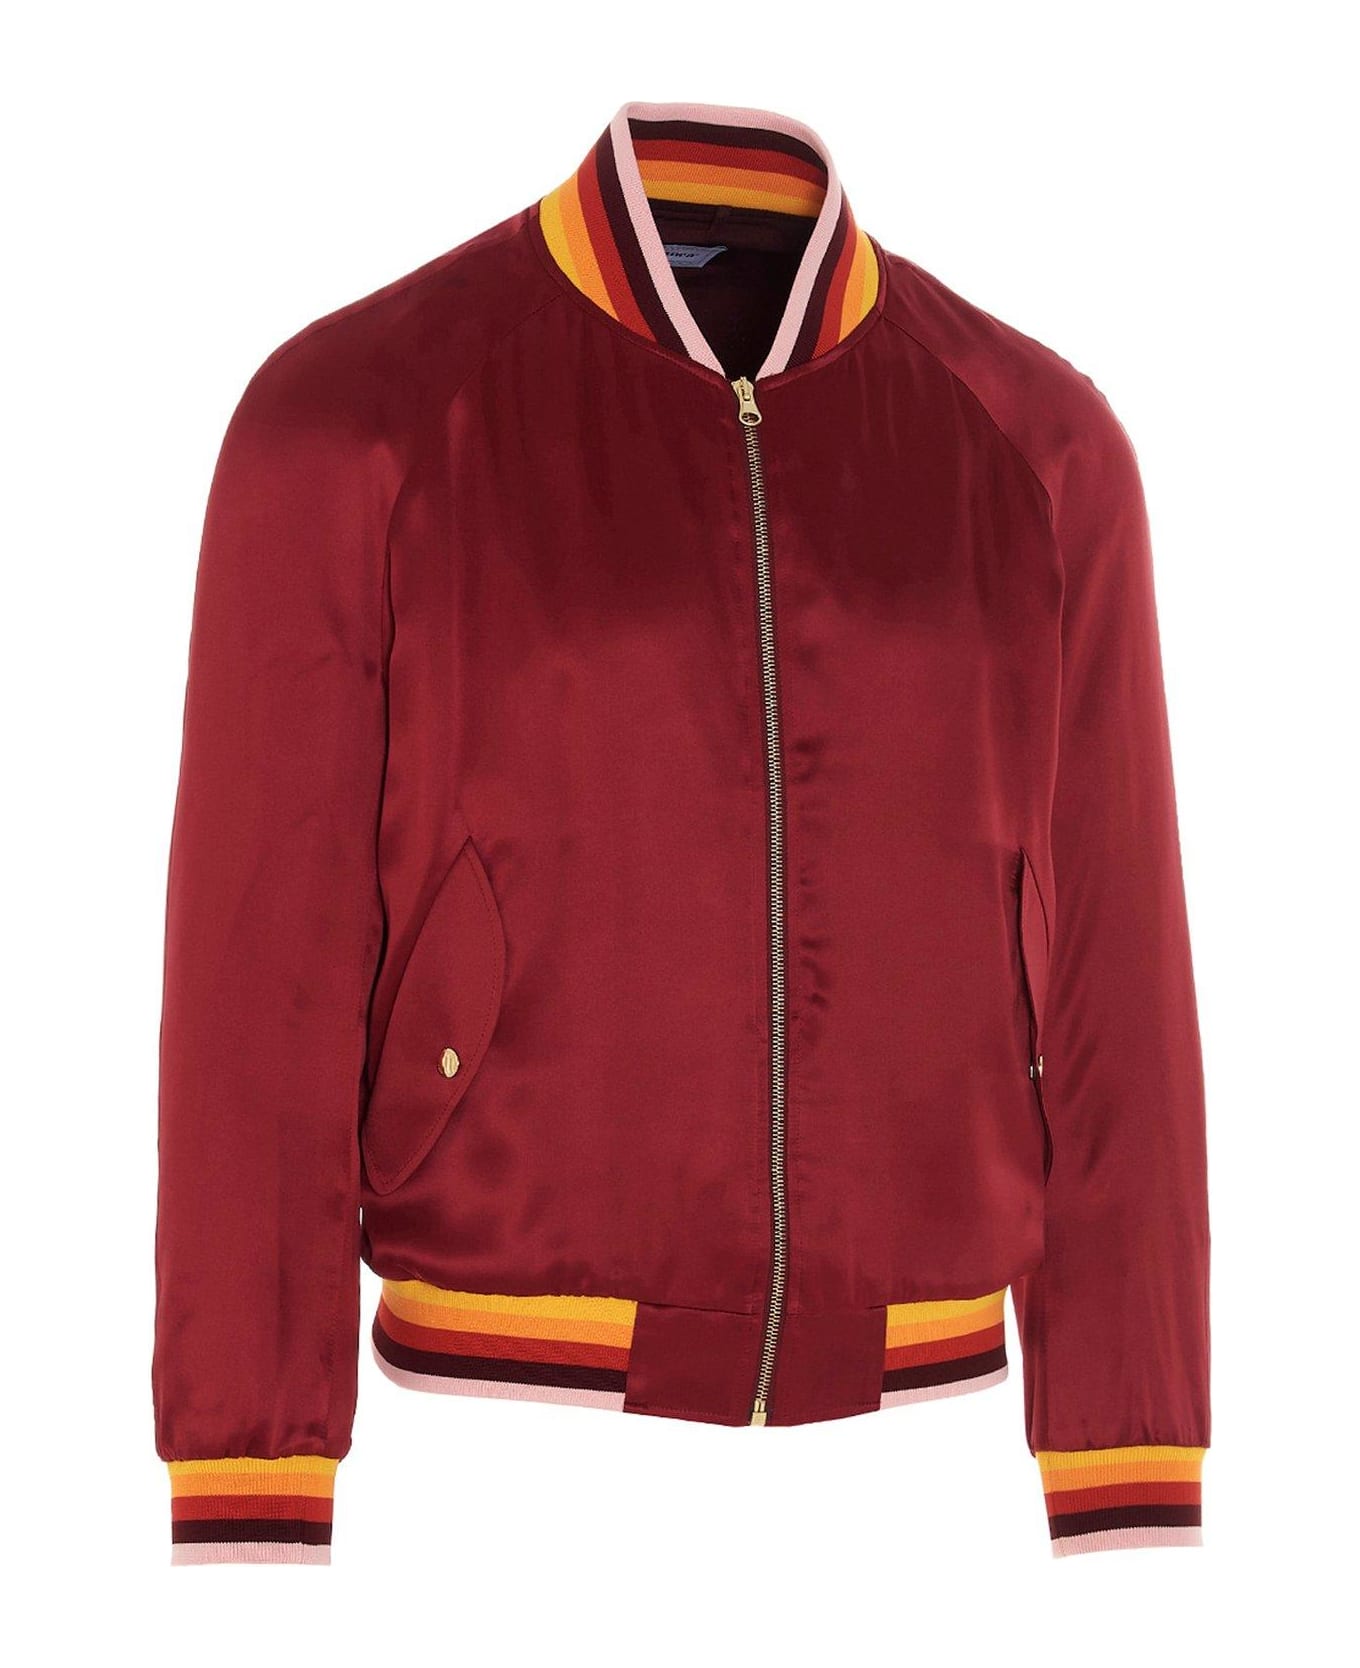 Casablanca Graphic Embroidered Bomber Jacket - Red